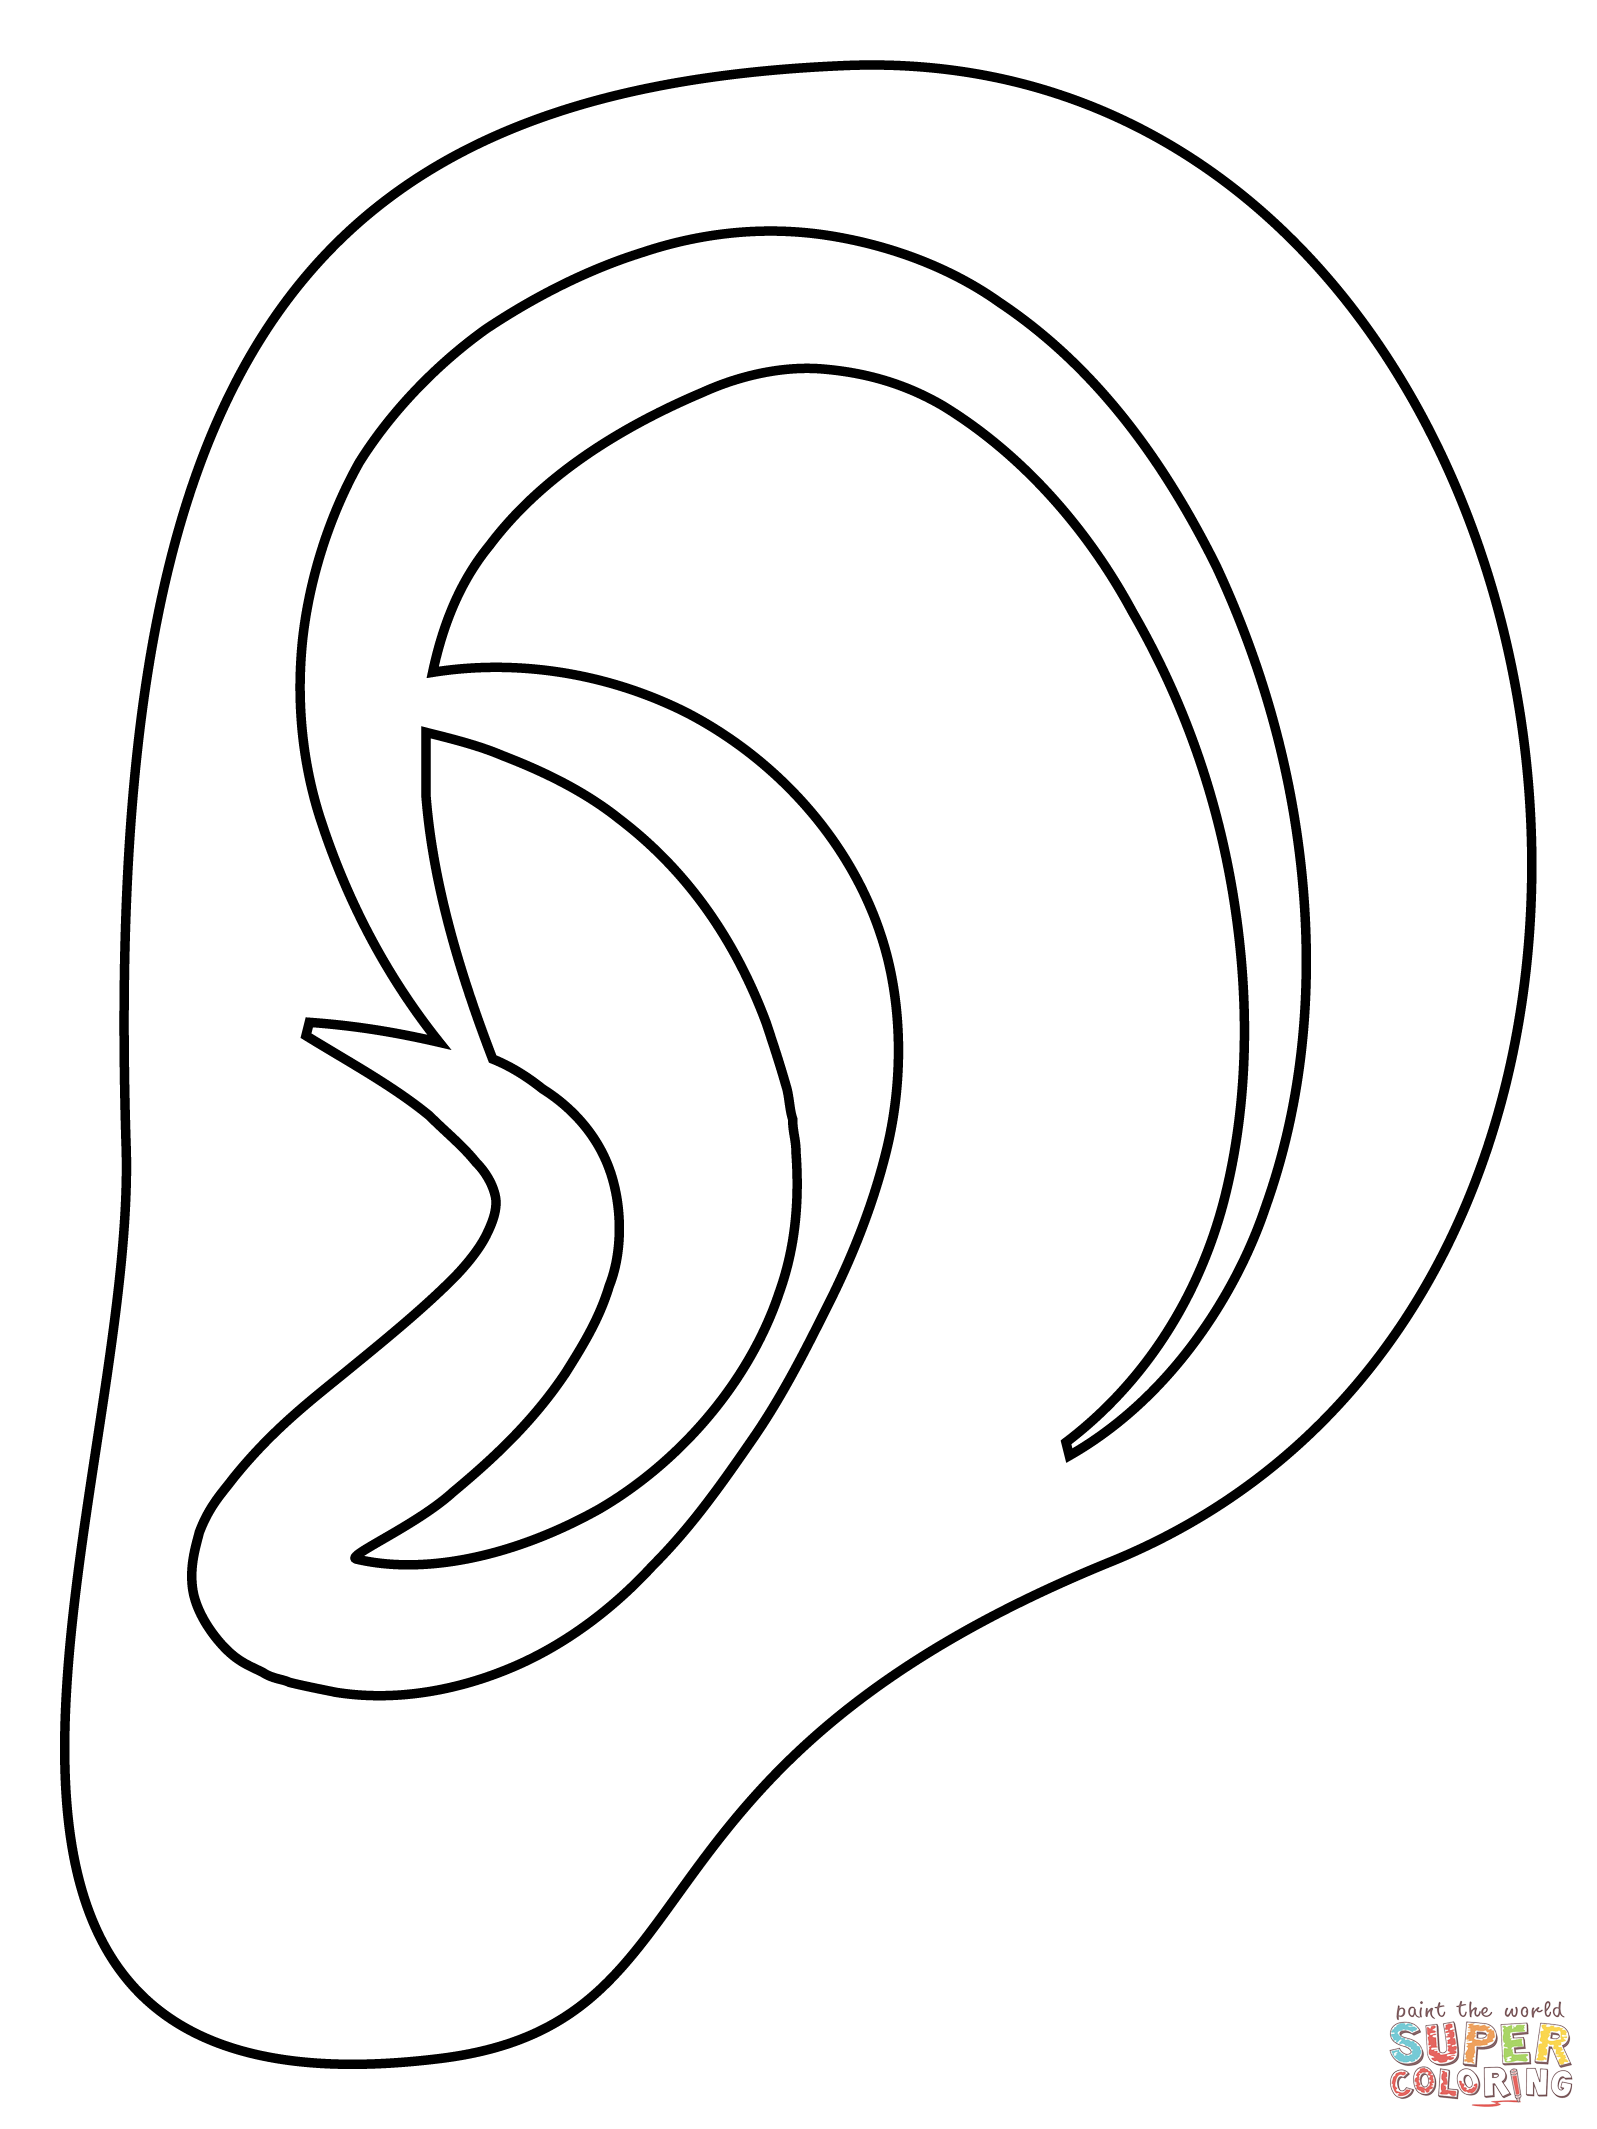 Ear coloring page free printable coloring pages